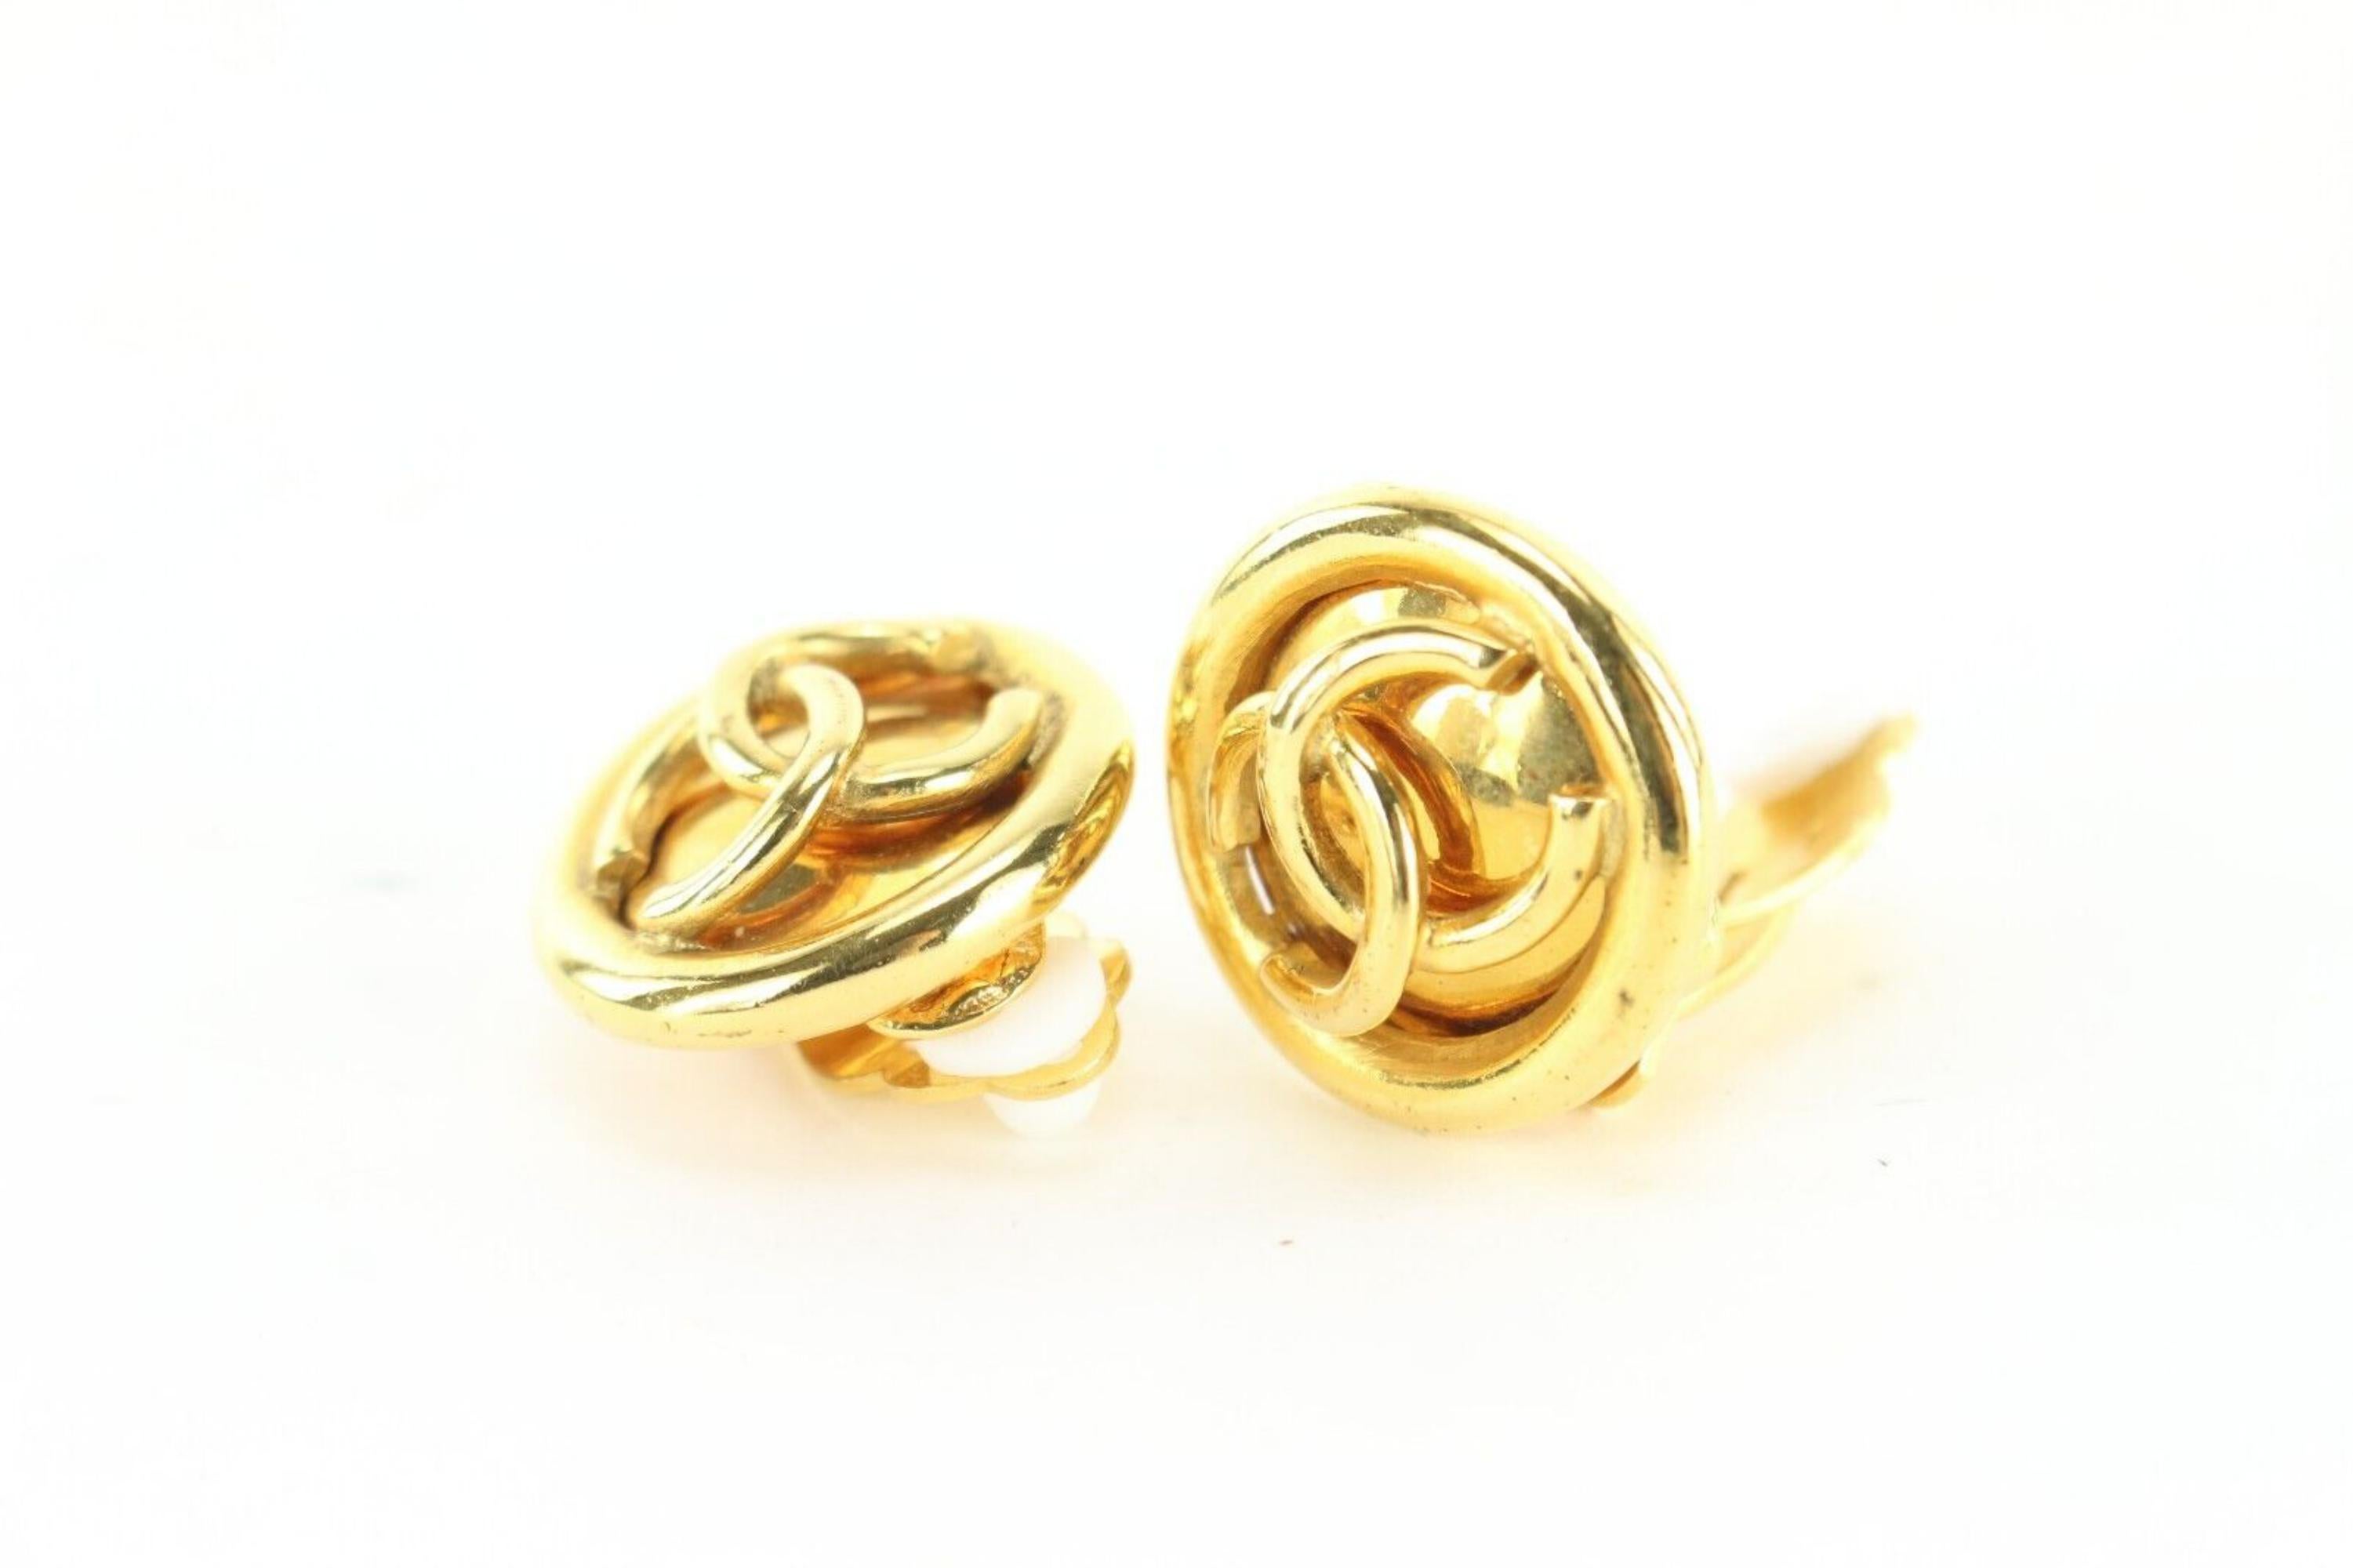 Chanel 24k Gold Plated CC Round Earrings Clip-On 1CK1202

Date Code/Serial Number: 93P

Made In: France

Measurements: Length:  .75